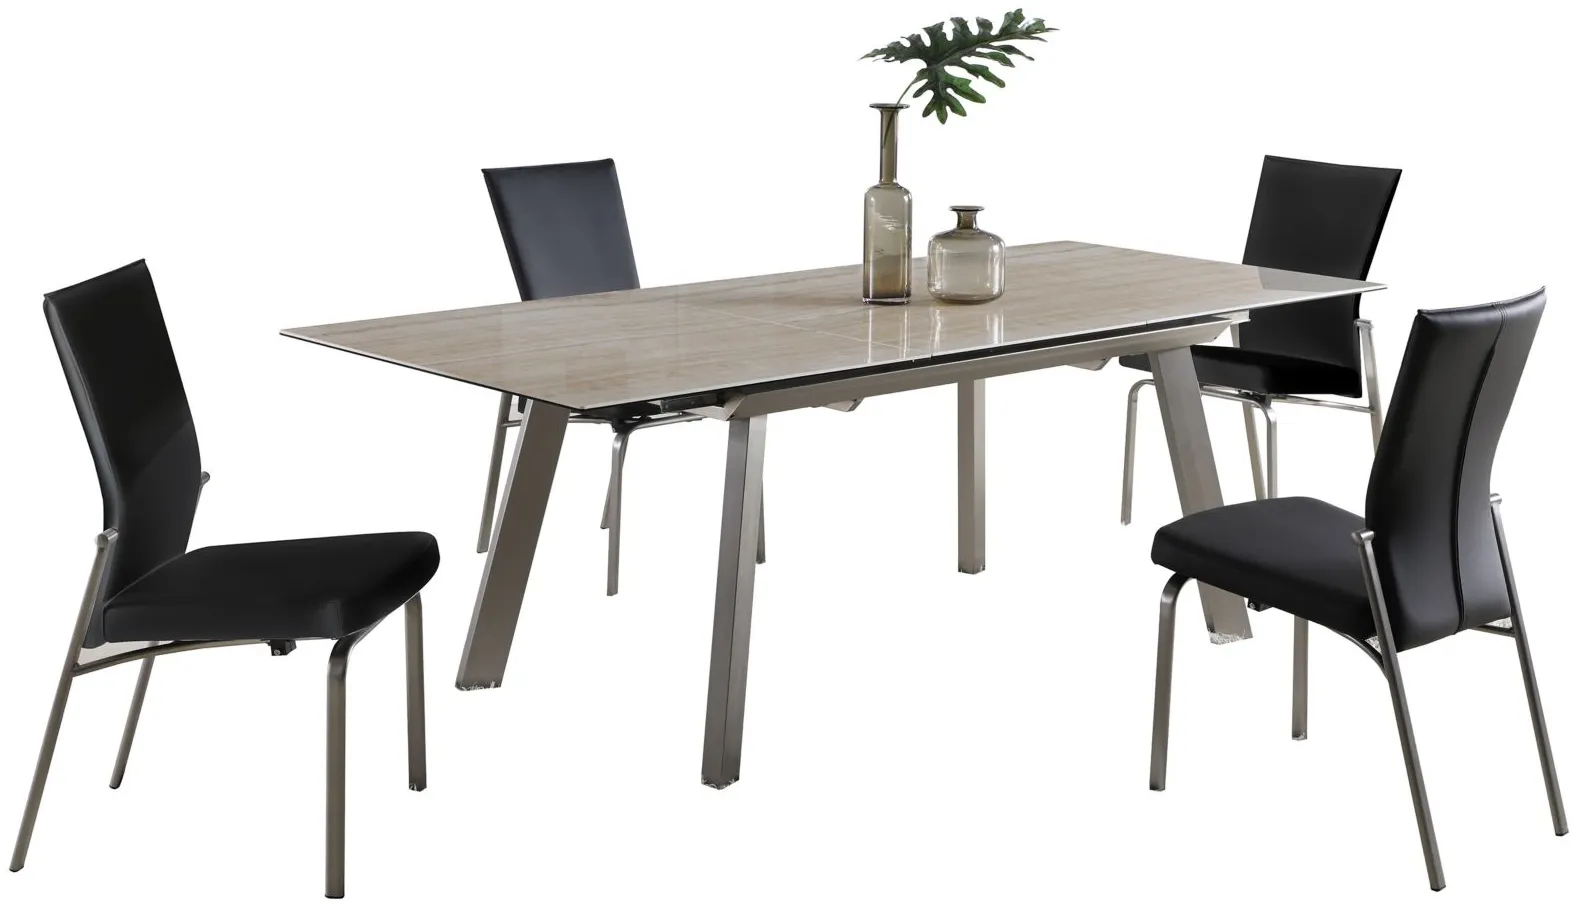 Eleanoir 5-pc. Dining Set in Beige and Black by Chintaly Imports